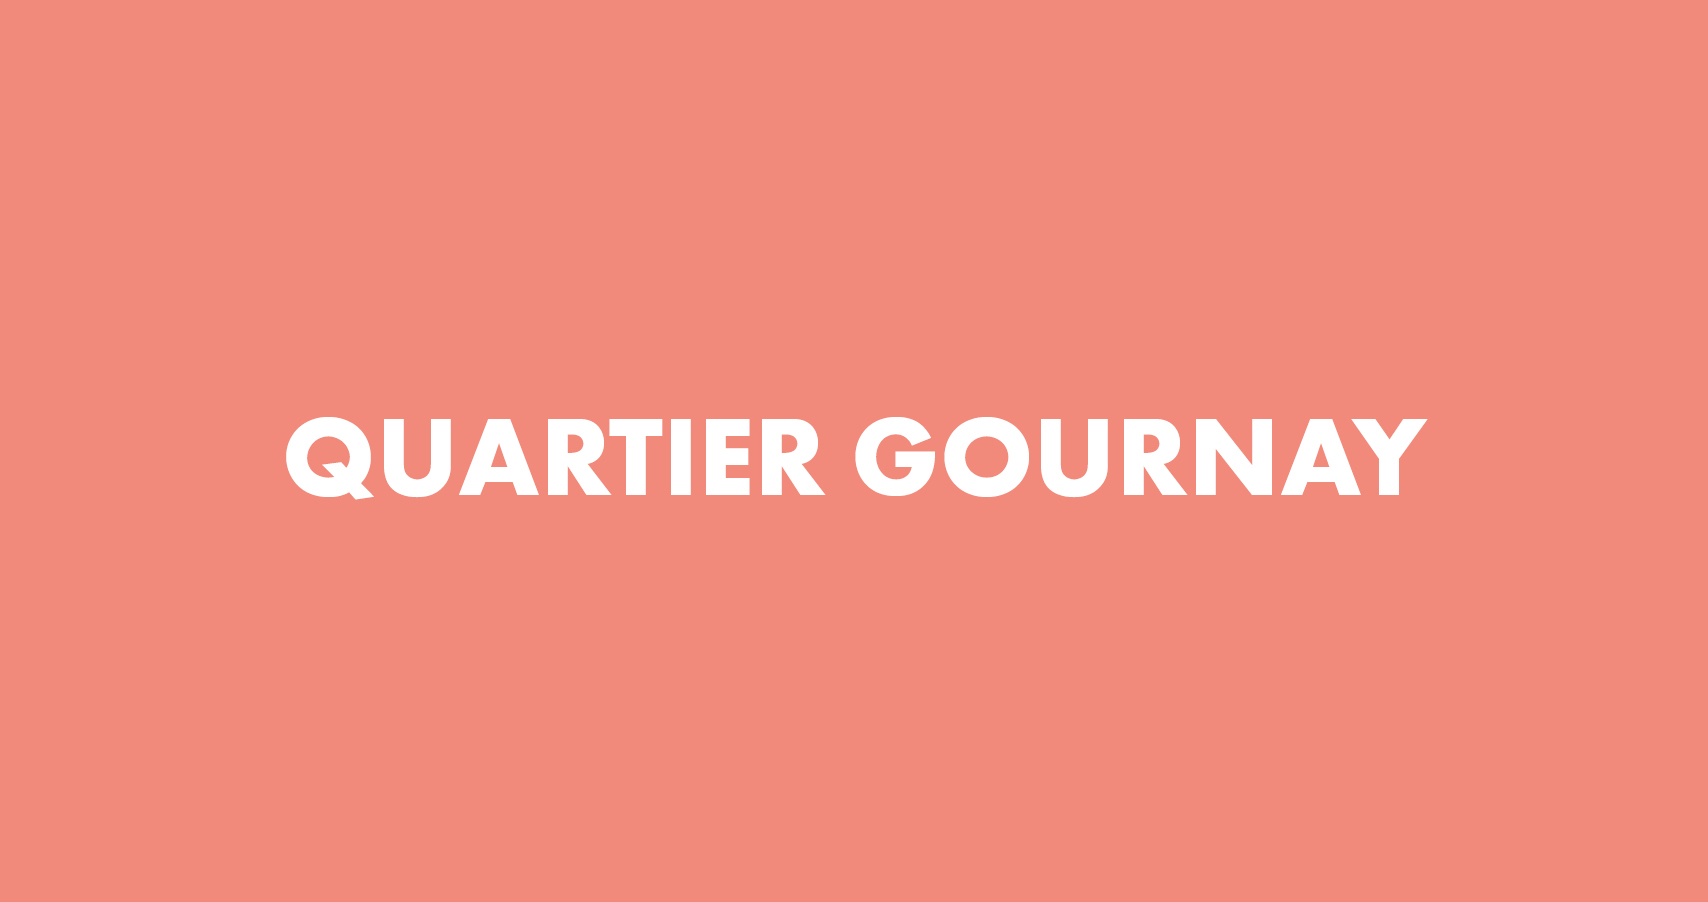 Gournay